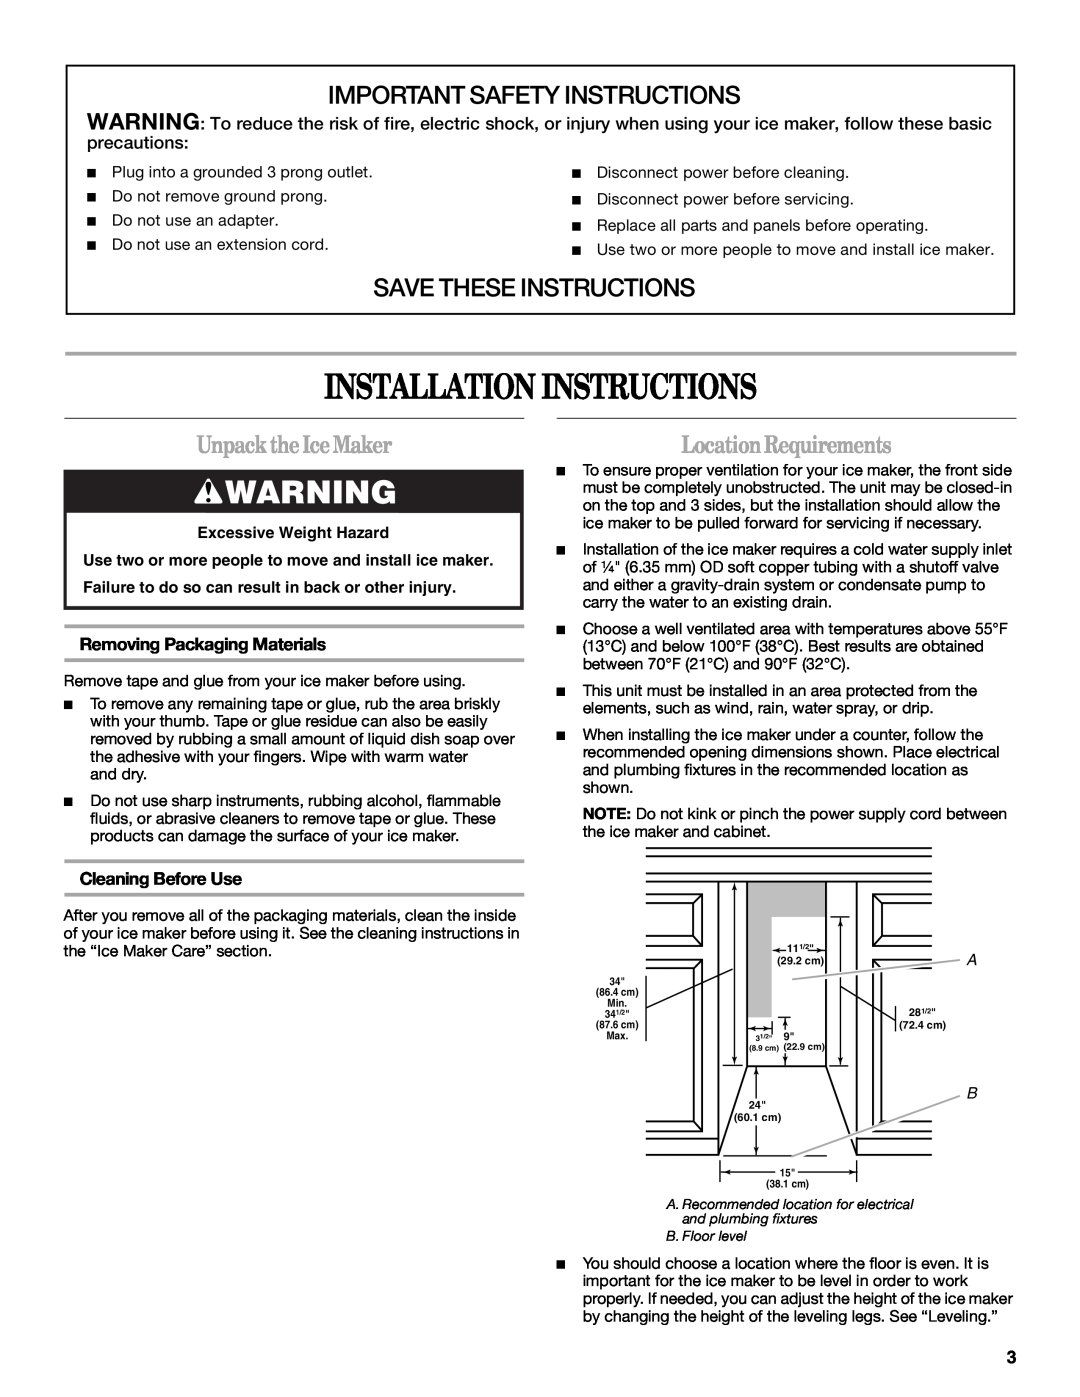 Whirlpool W10136155B manual Installation Instructions, Important Safety Instructions, Save These Instructions, precautions 